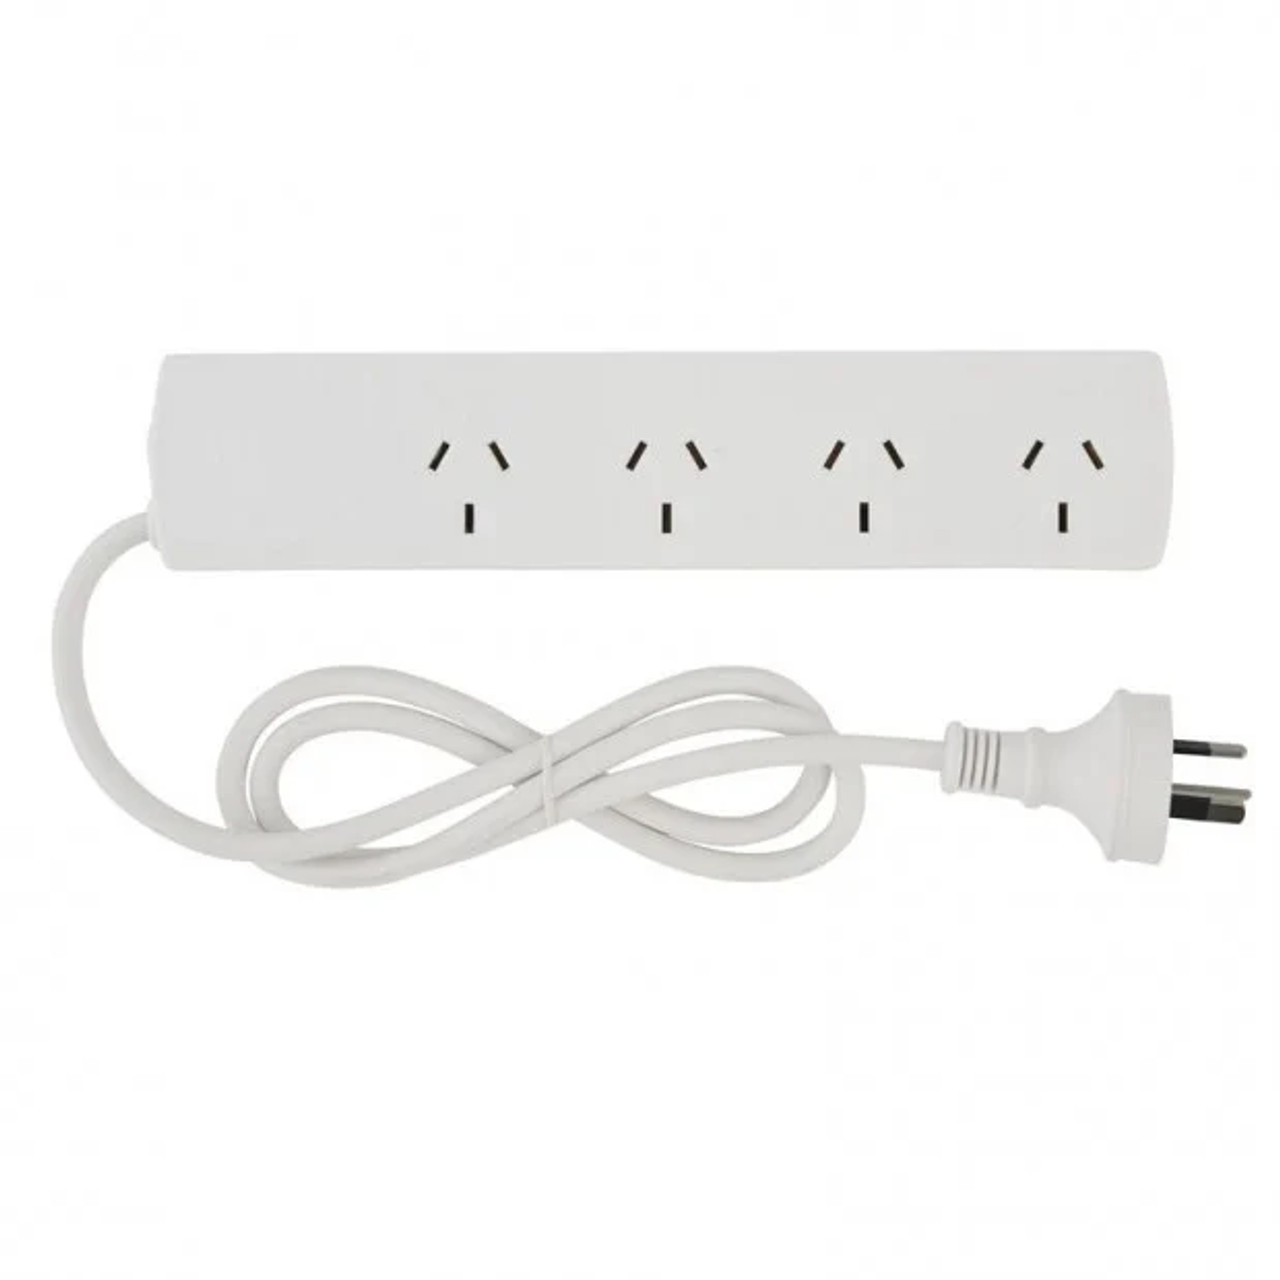 Power board white different sizes